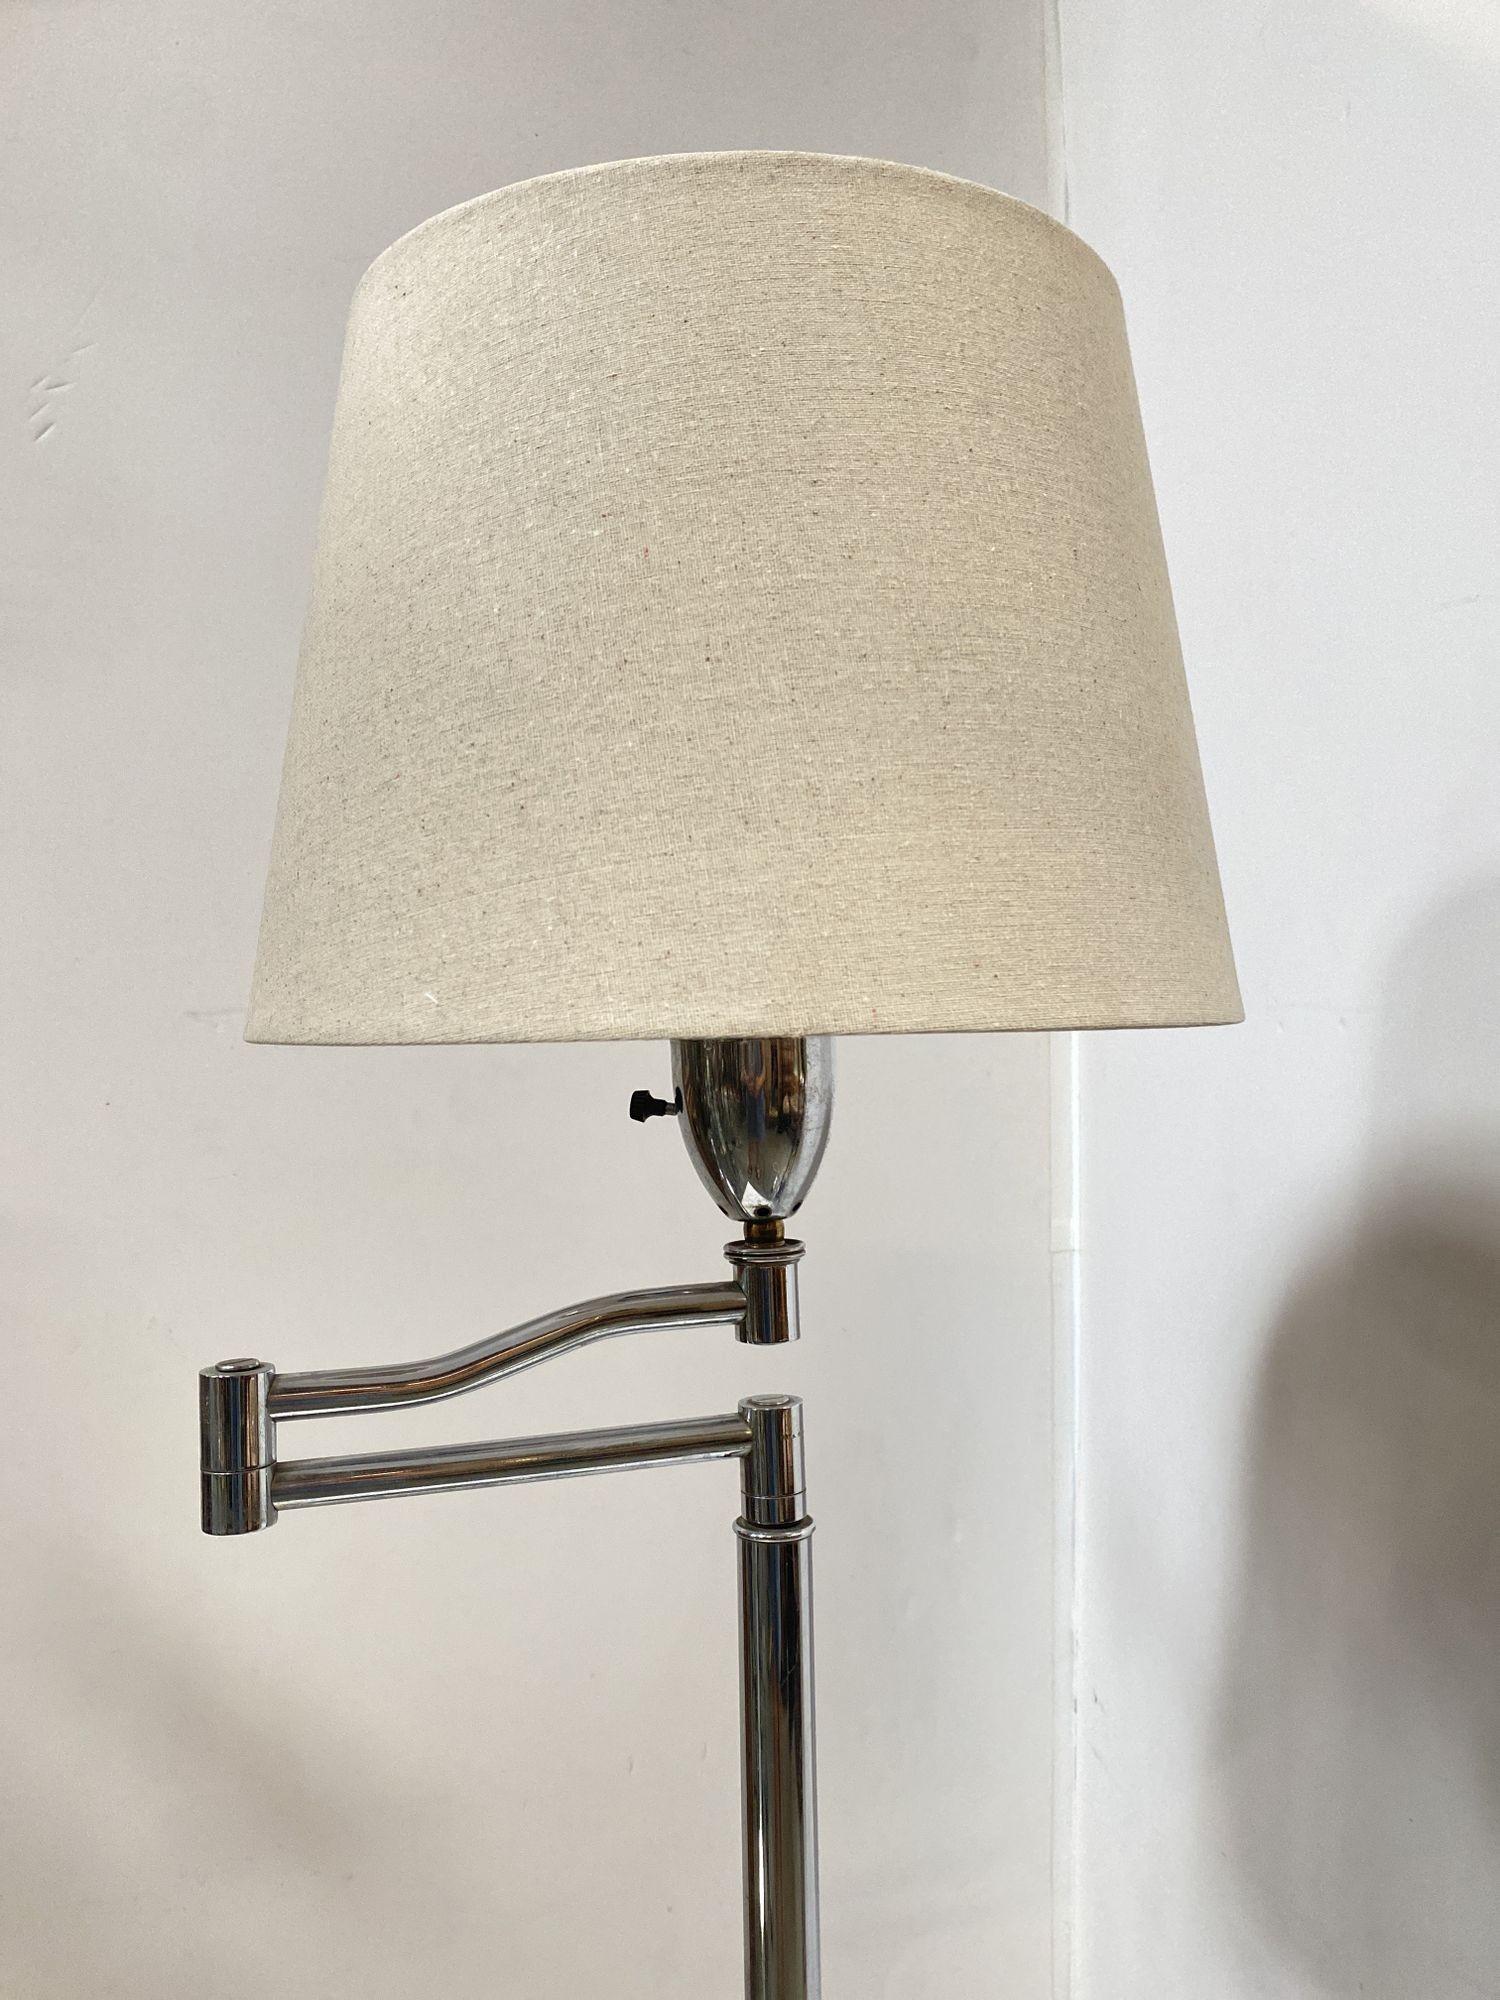 Mid-20th Century Art Moderne Wood and Chrome Swing Arm Floor Lamp For Sale